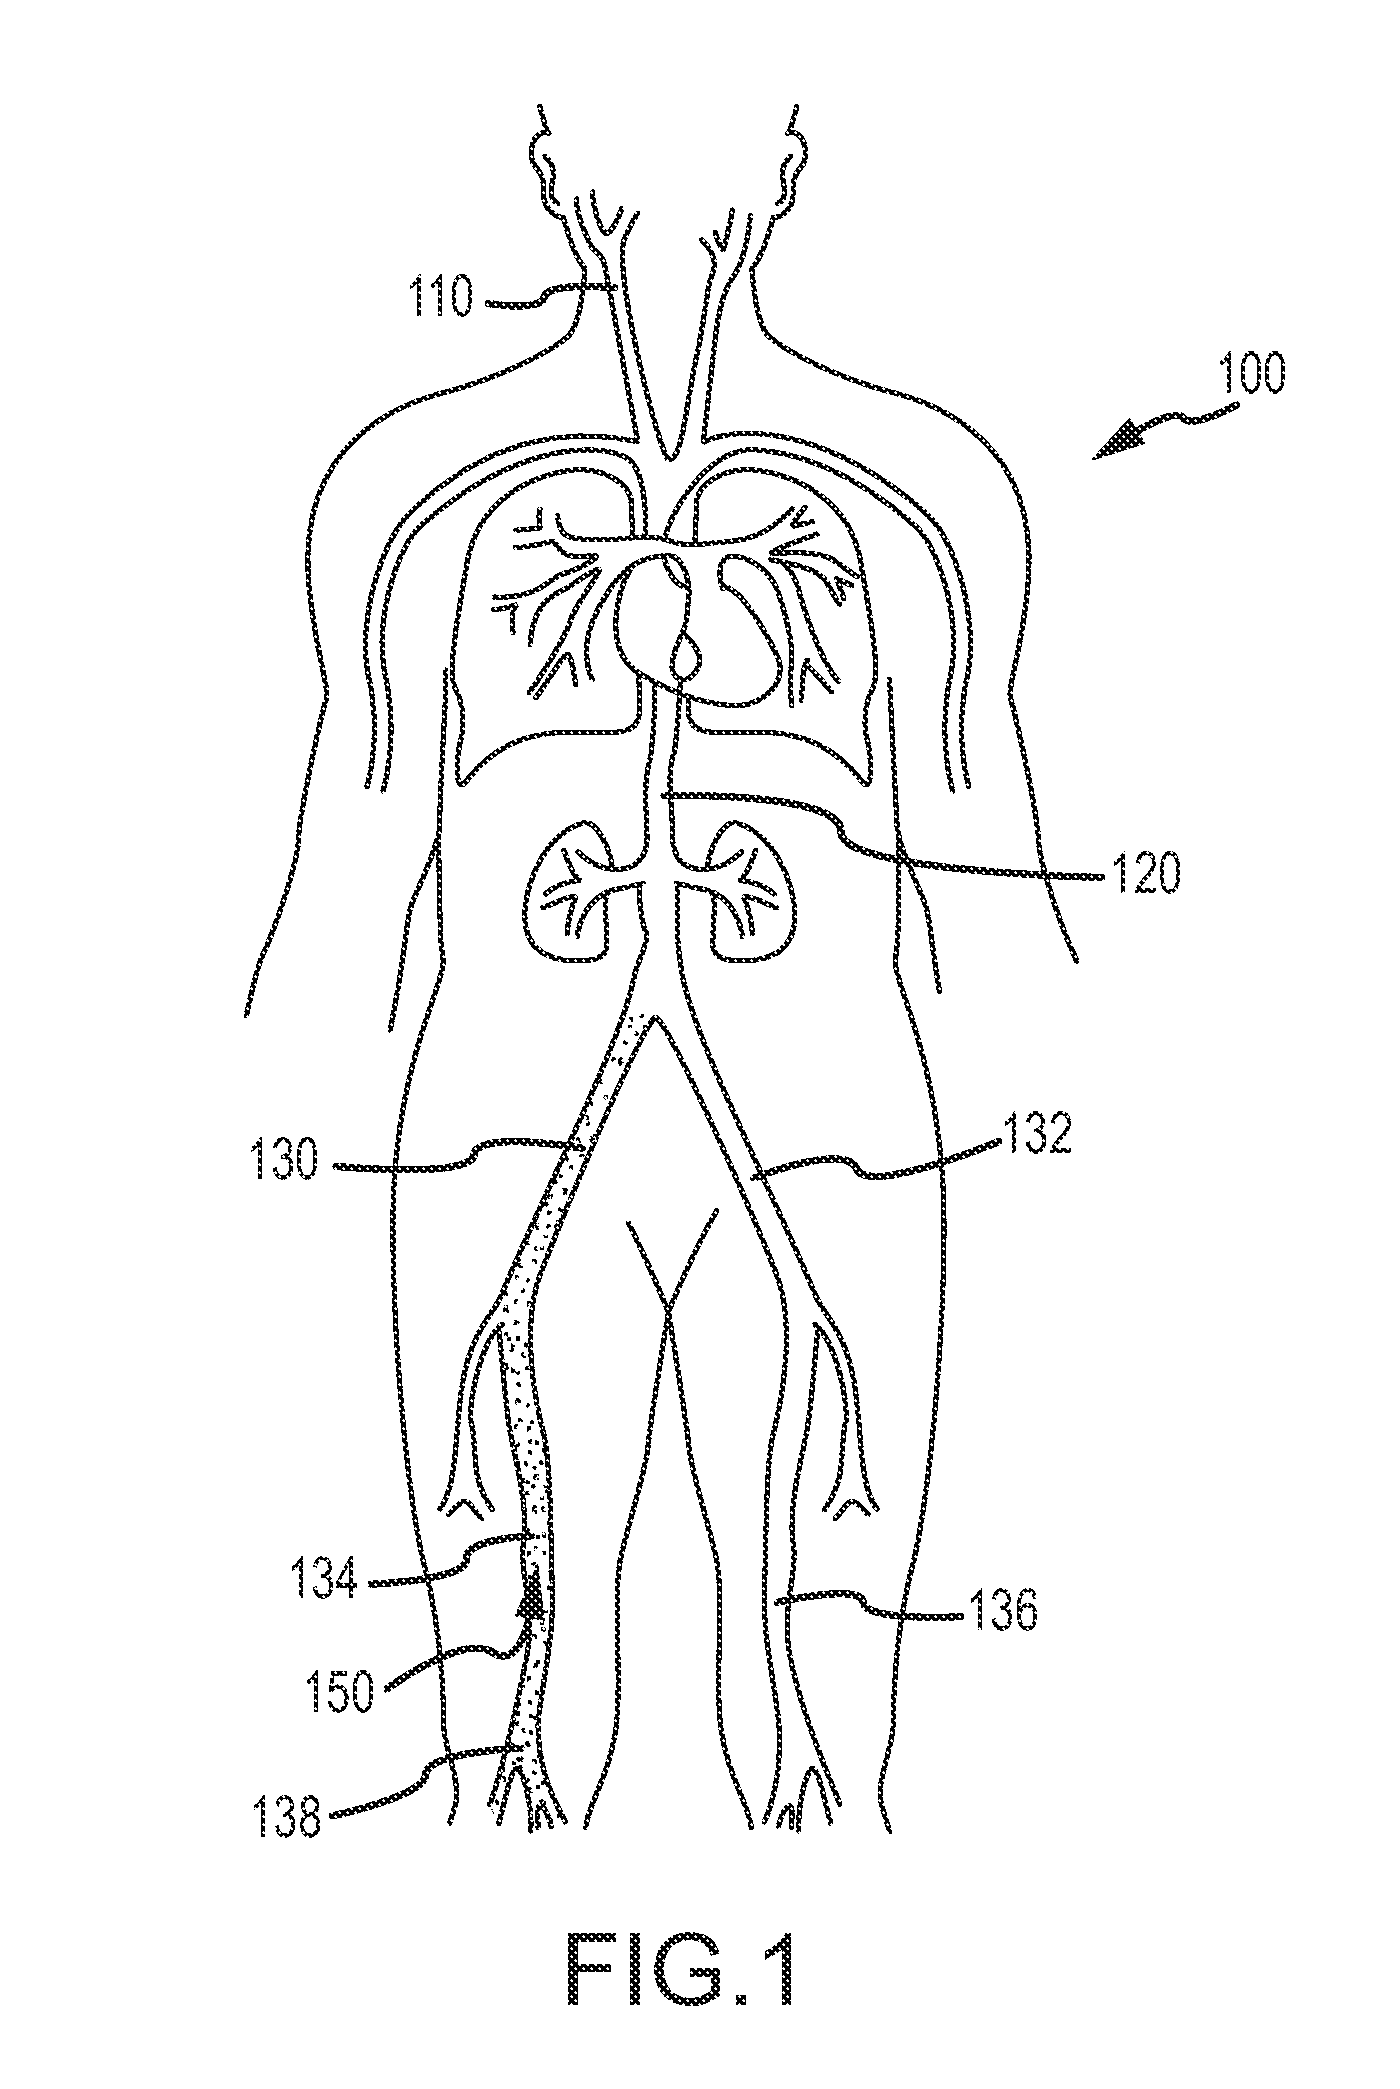 Devices and methods for treating venous diseases